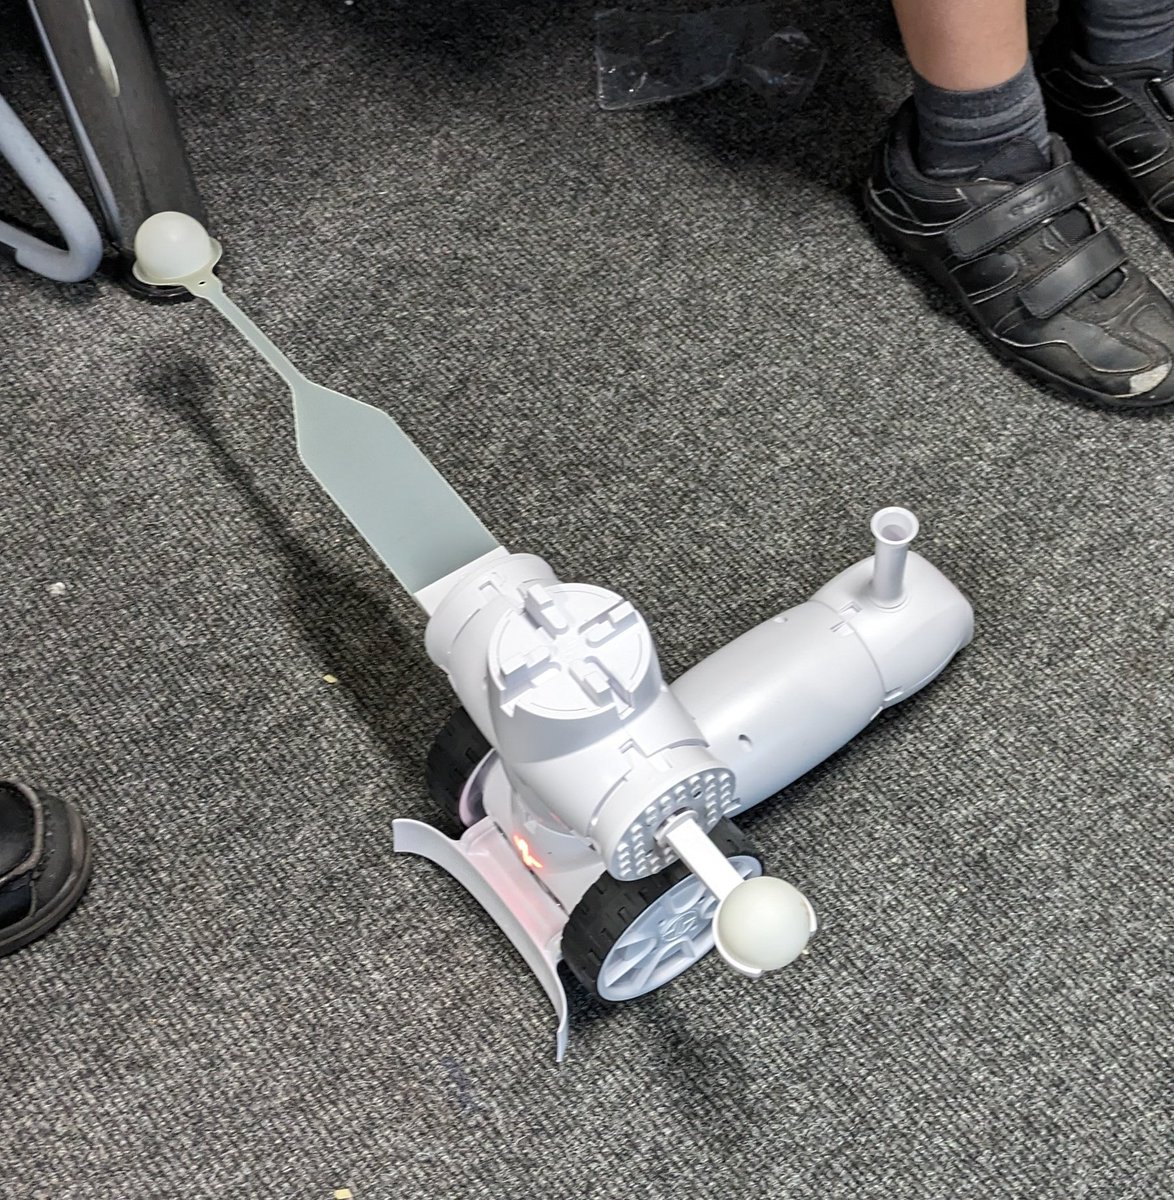 Had fun yesterday continuing to explore @ShapeRobotics with the children at school. They do like the easy building capabilities, adding the eyes this week was exciting. Thanks to @LGfL for running the project. Next try and develop some more purpose. #caschat #computing #Robotics